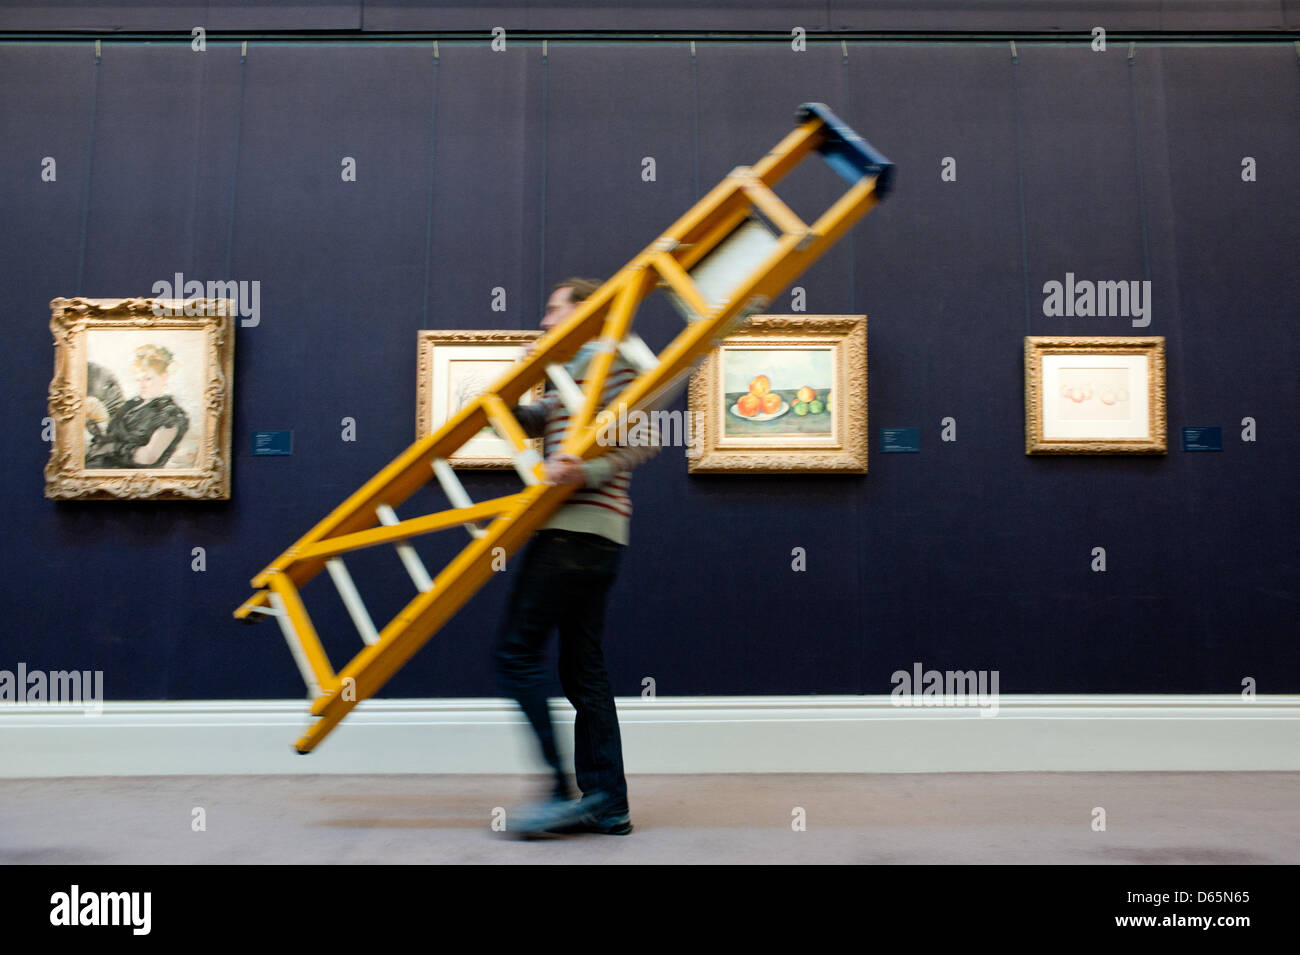 London, UK. 12th April 2013. A Sotheby's employee walks by with a ladder in front of  impressionist paintings including 'Les Pommes' by Paul Cezanne that will go on sale at Sotheby’s New York in May 2013. The Blockbuster sales at include works by Richter, Modigliani, Picasso, Rodin, Bacon, Cezanne. Credit: Piero Cruciatti / Alamy Live News Stock Photo